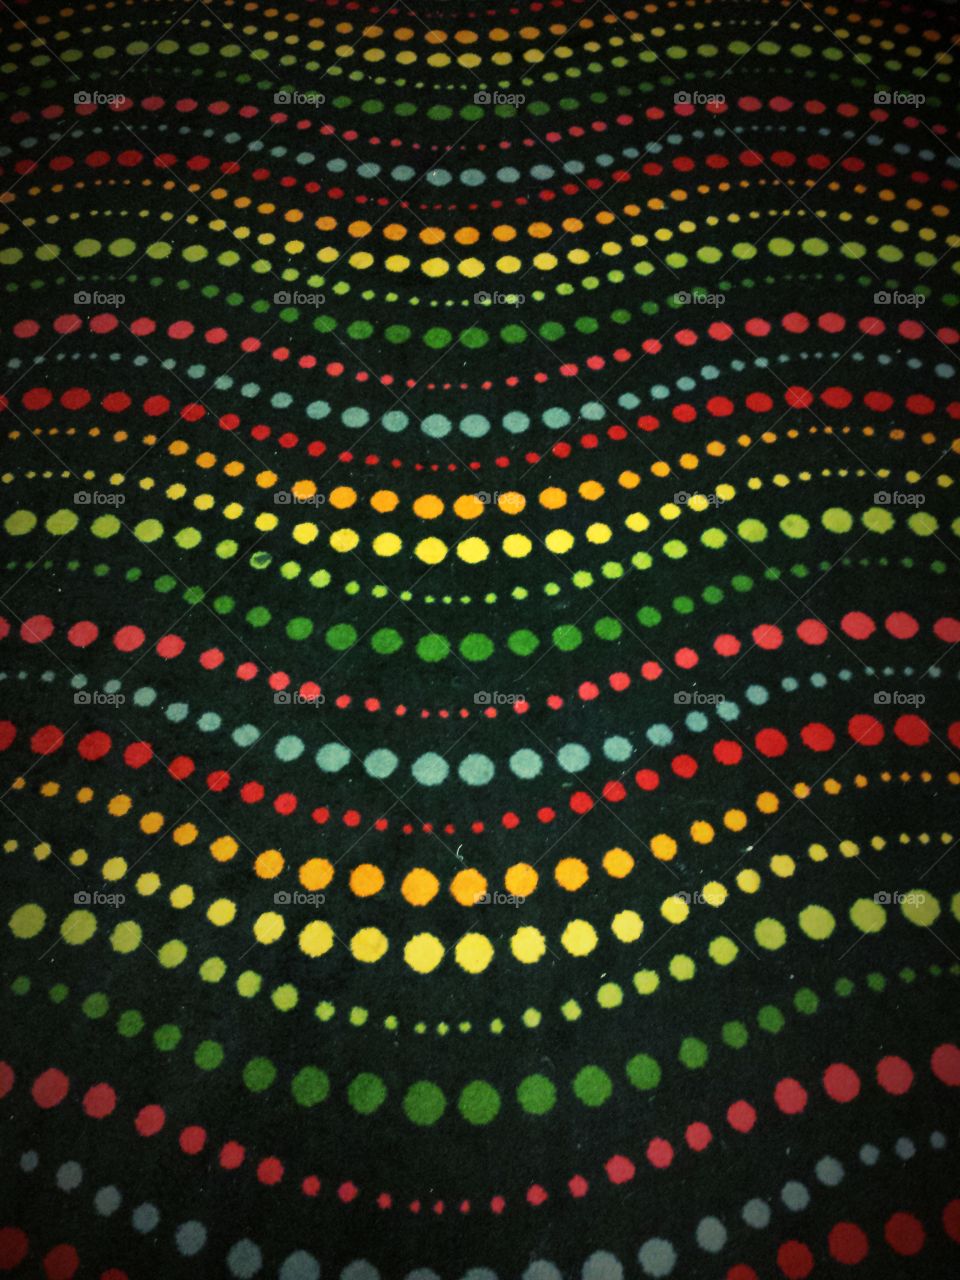 Pattern with colorful polka dots on black background